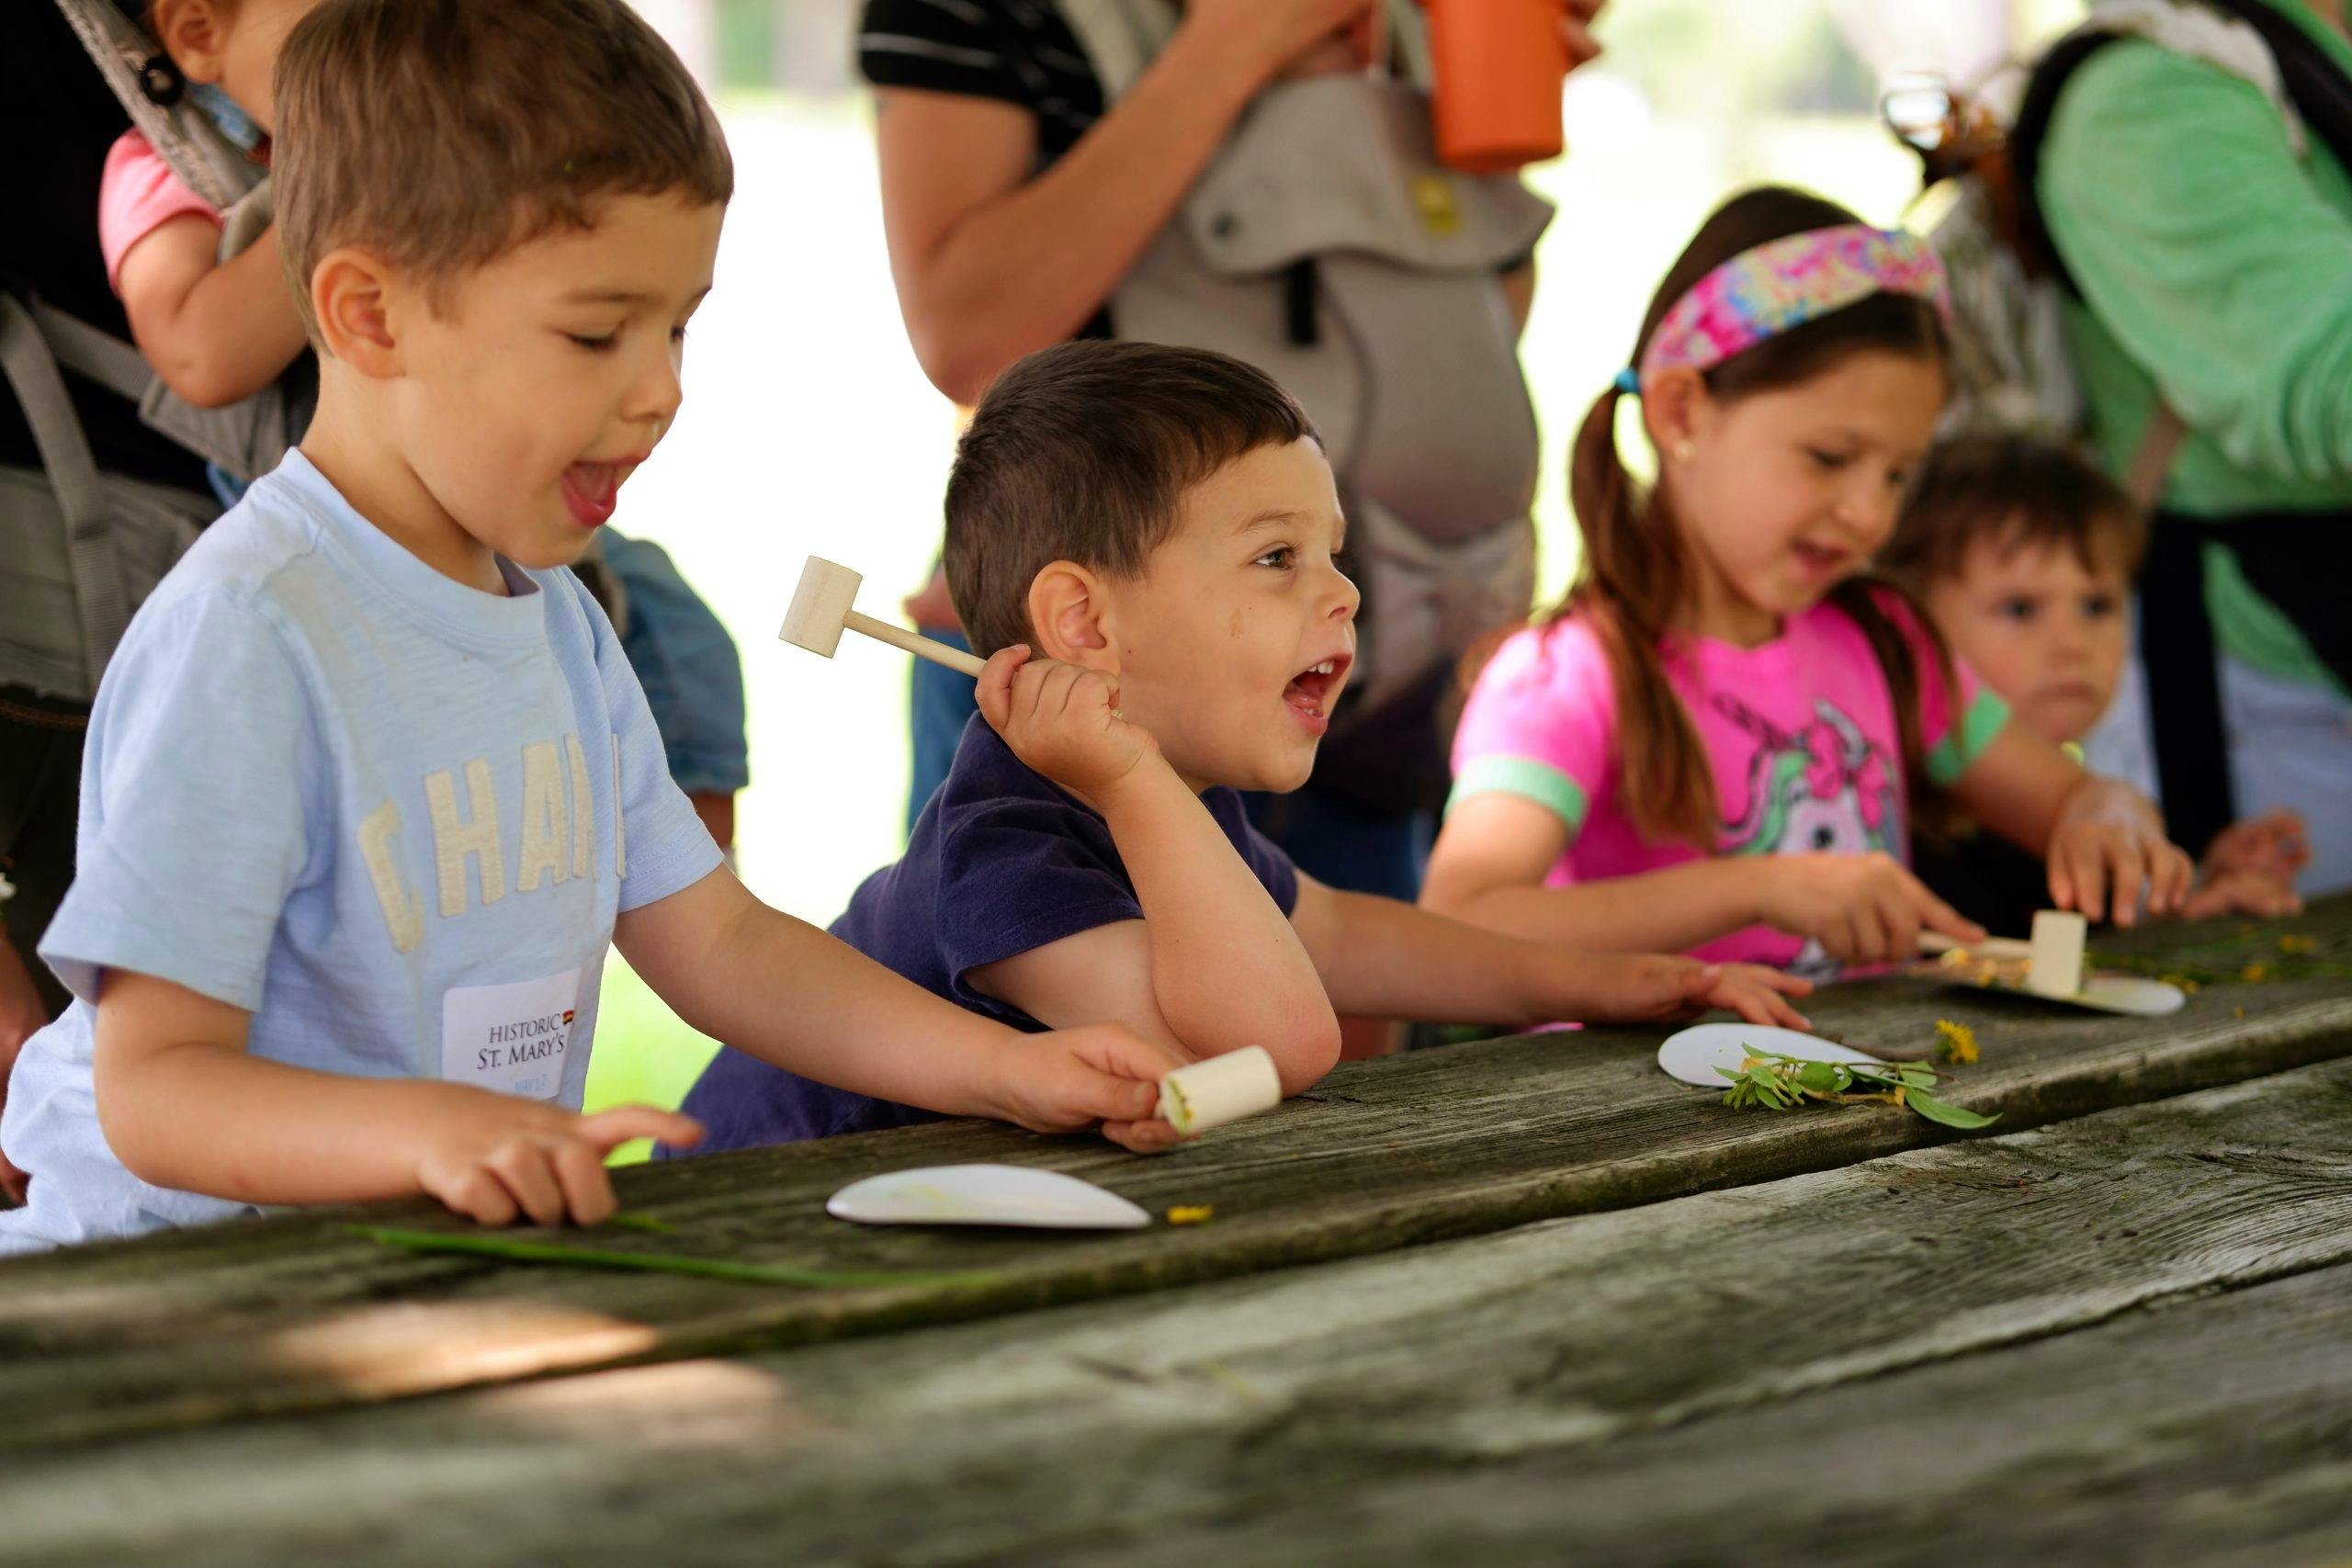 Three children are sitting outside at a wooden picnic table. They are participating in the Little Explorers preschool program. They each have a little wooden mallet in their hand and a small paper plate in front of them on the table. Next to the plate is a small gathering of leaves and flowers. They each have an excited look on their faces.